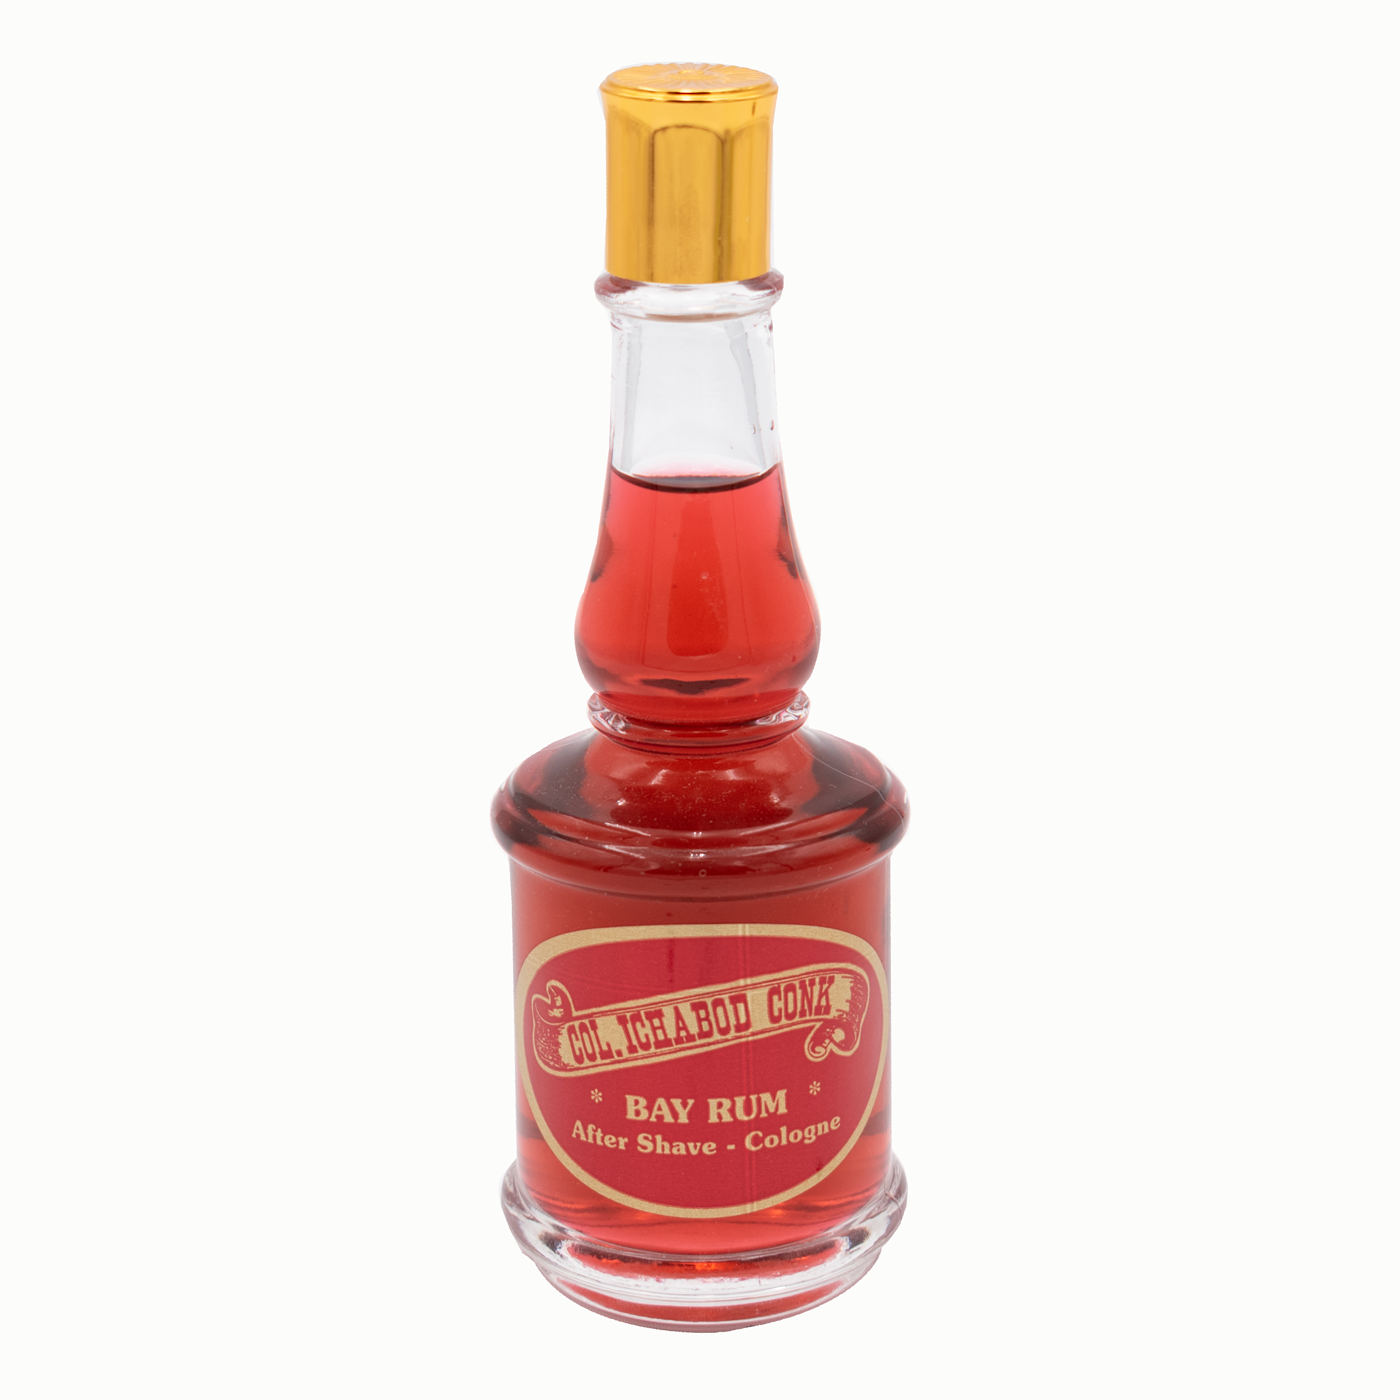 Colonel Conk Bay Rum After Shave Cologne